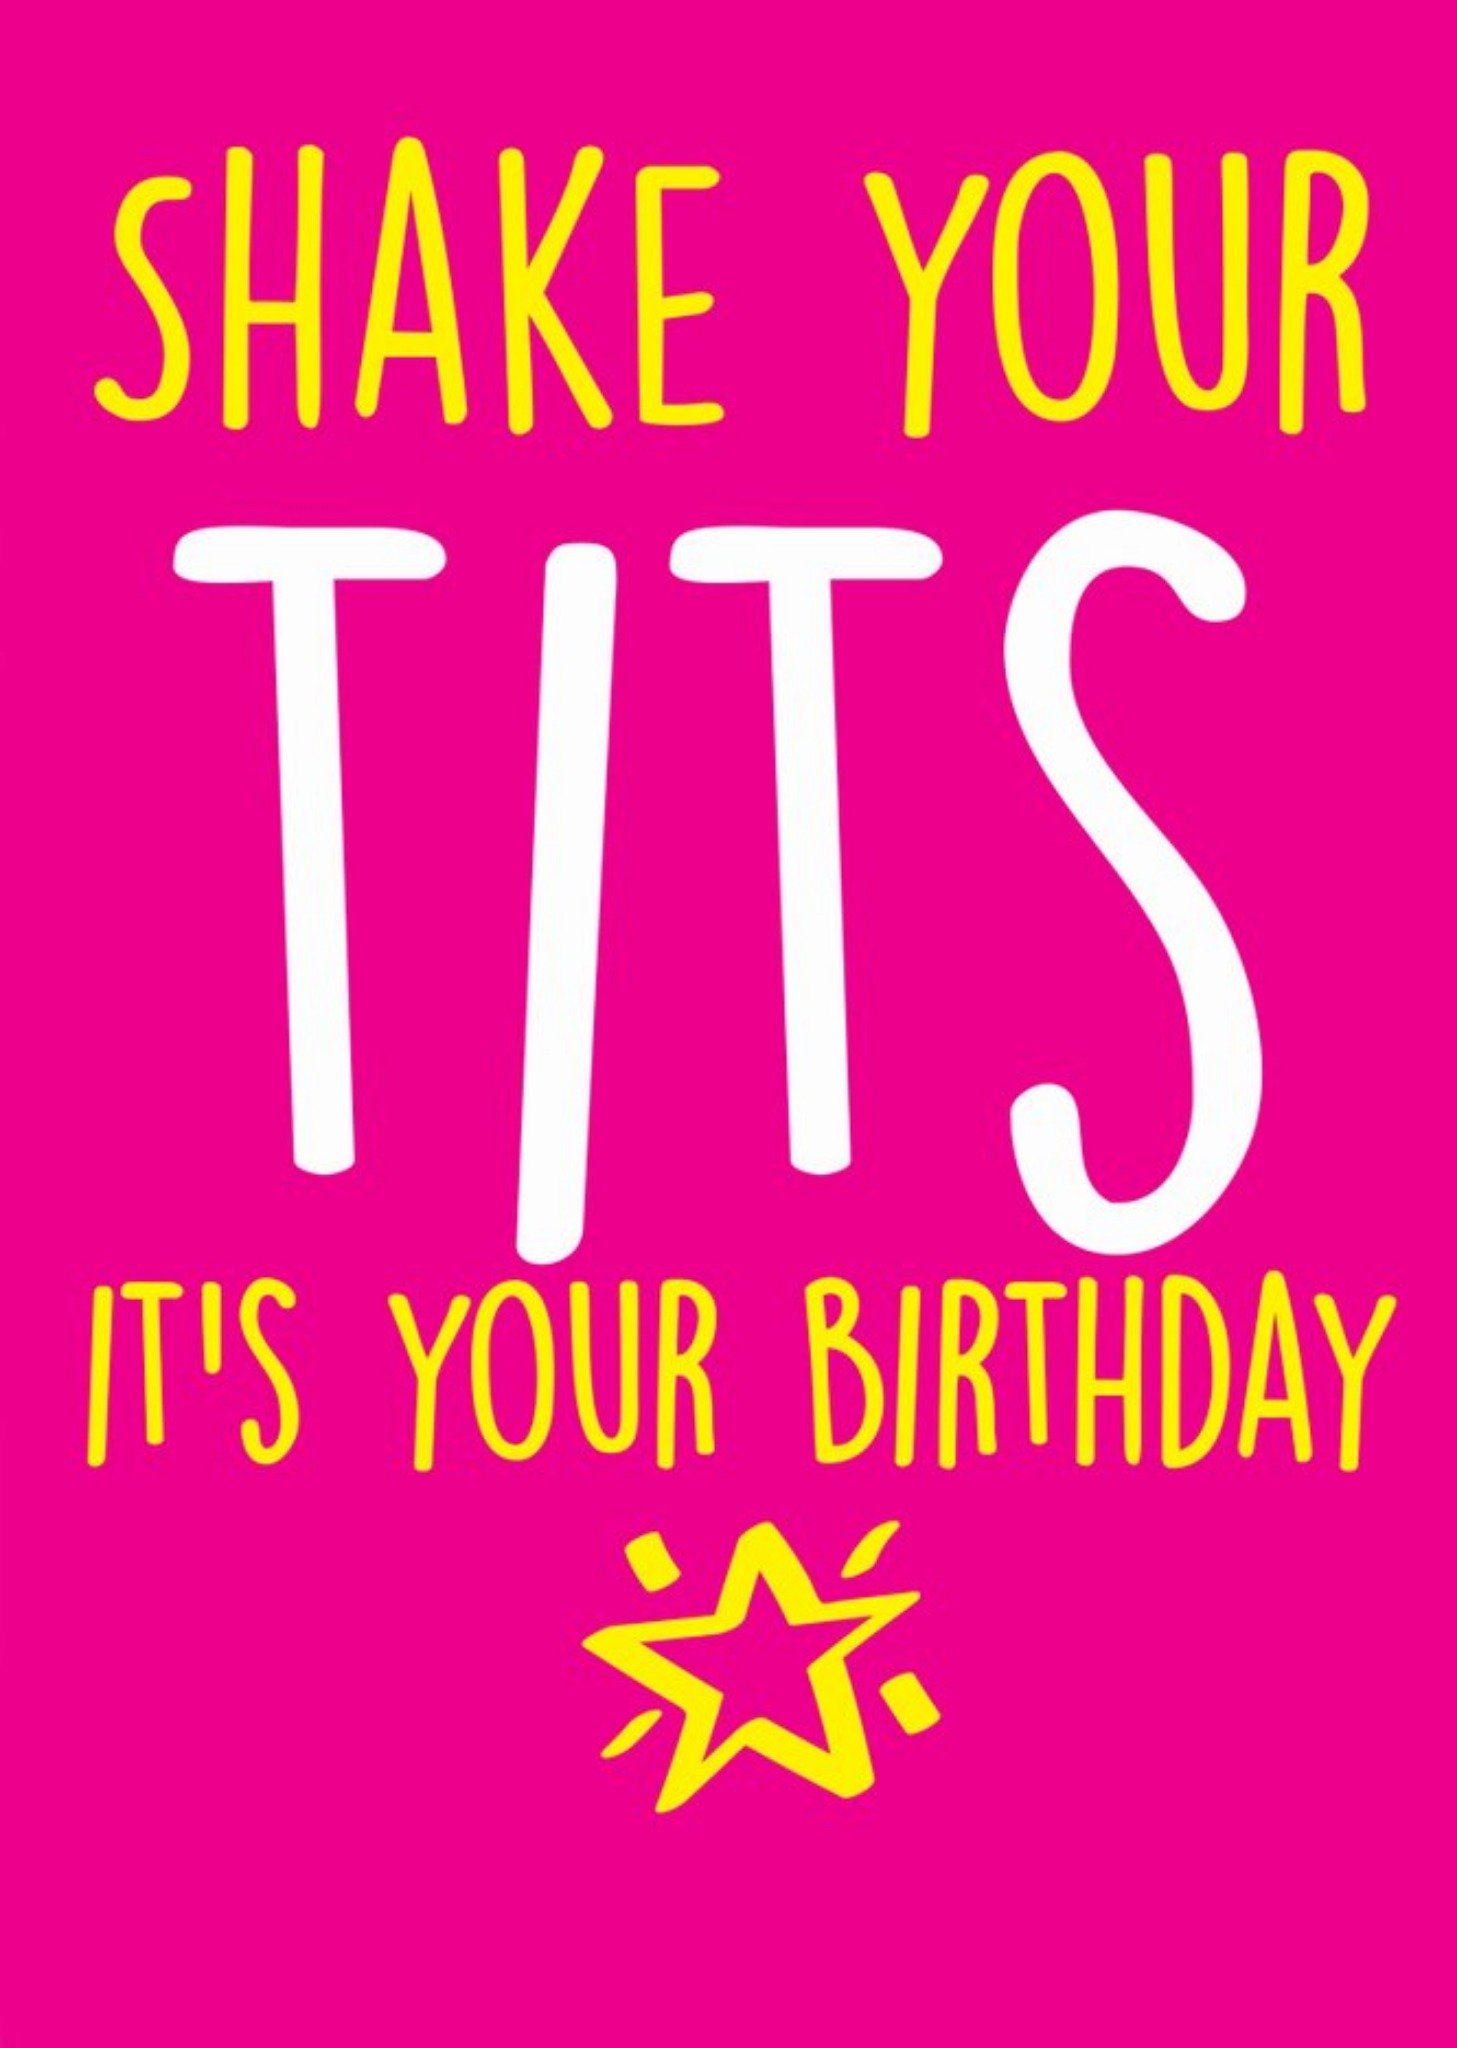 Moonpig Funny Cheeky Chops Shake Your Tits Its Your Birthday Card, Large